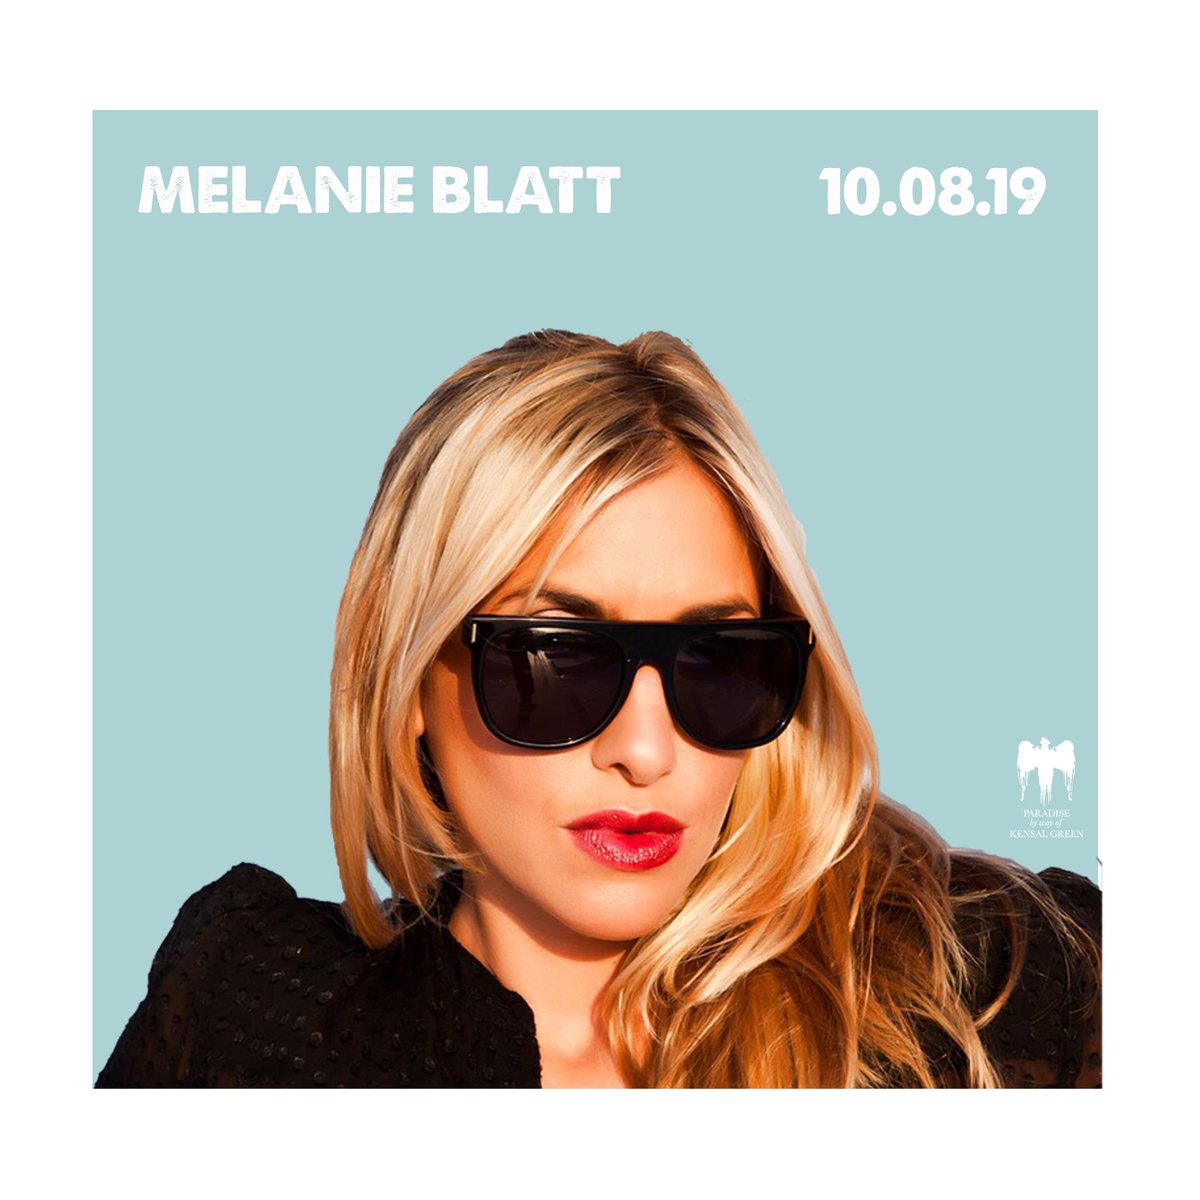 SATURDAY IS THE NIGHT! Melanie Blatt of All Saints fame is joining the Blondie to Biggie duo alongside the @allsaintsoffic DJ KGee Advanced tickets are available now! Get them before it’s too late!